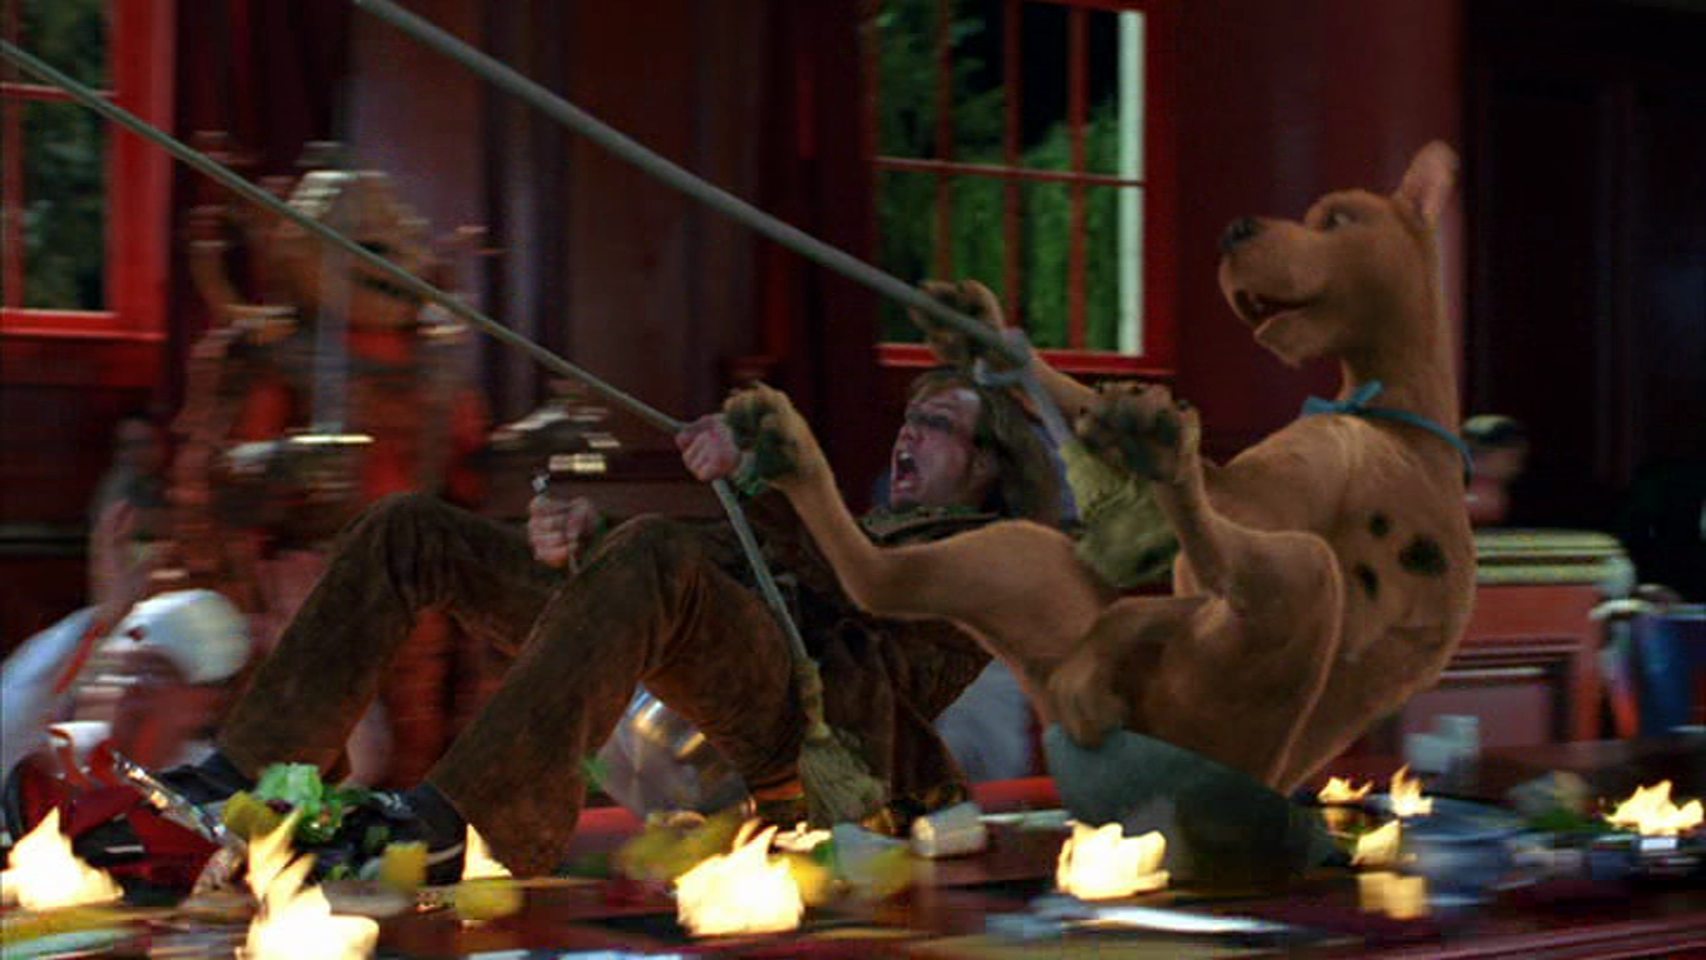 Image of Scooby Doo 2: Monsters Unleashed for fans of Scooby-Doo. 